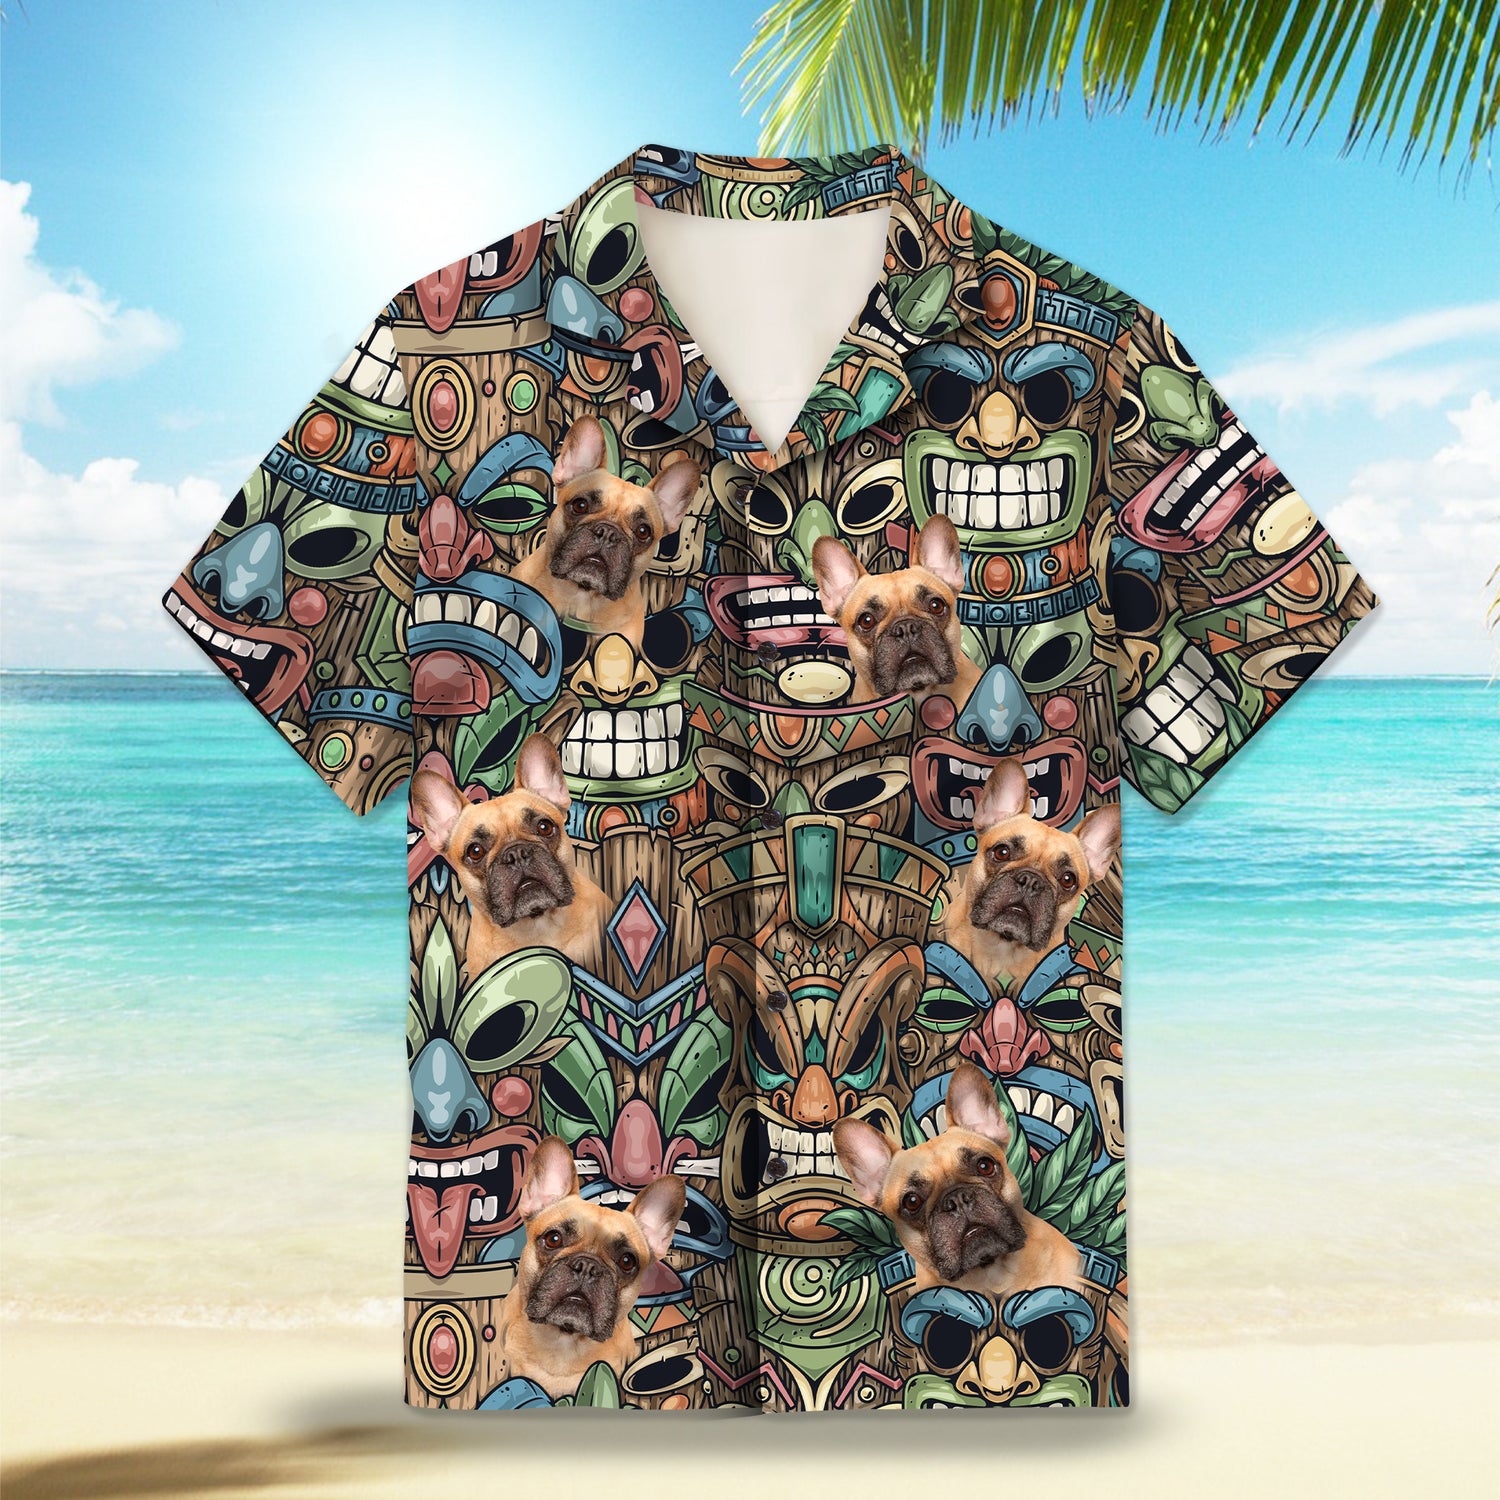 Image: Colorful Tiki Mask Custom Hawaiian Shirt. Featuring vibrant and intricate Tiki mask designs in a colorful palette, perfect for a tropical island vibe. Alt text for accessibility.